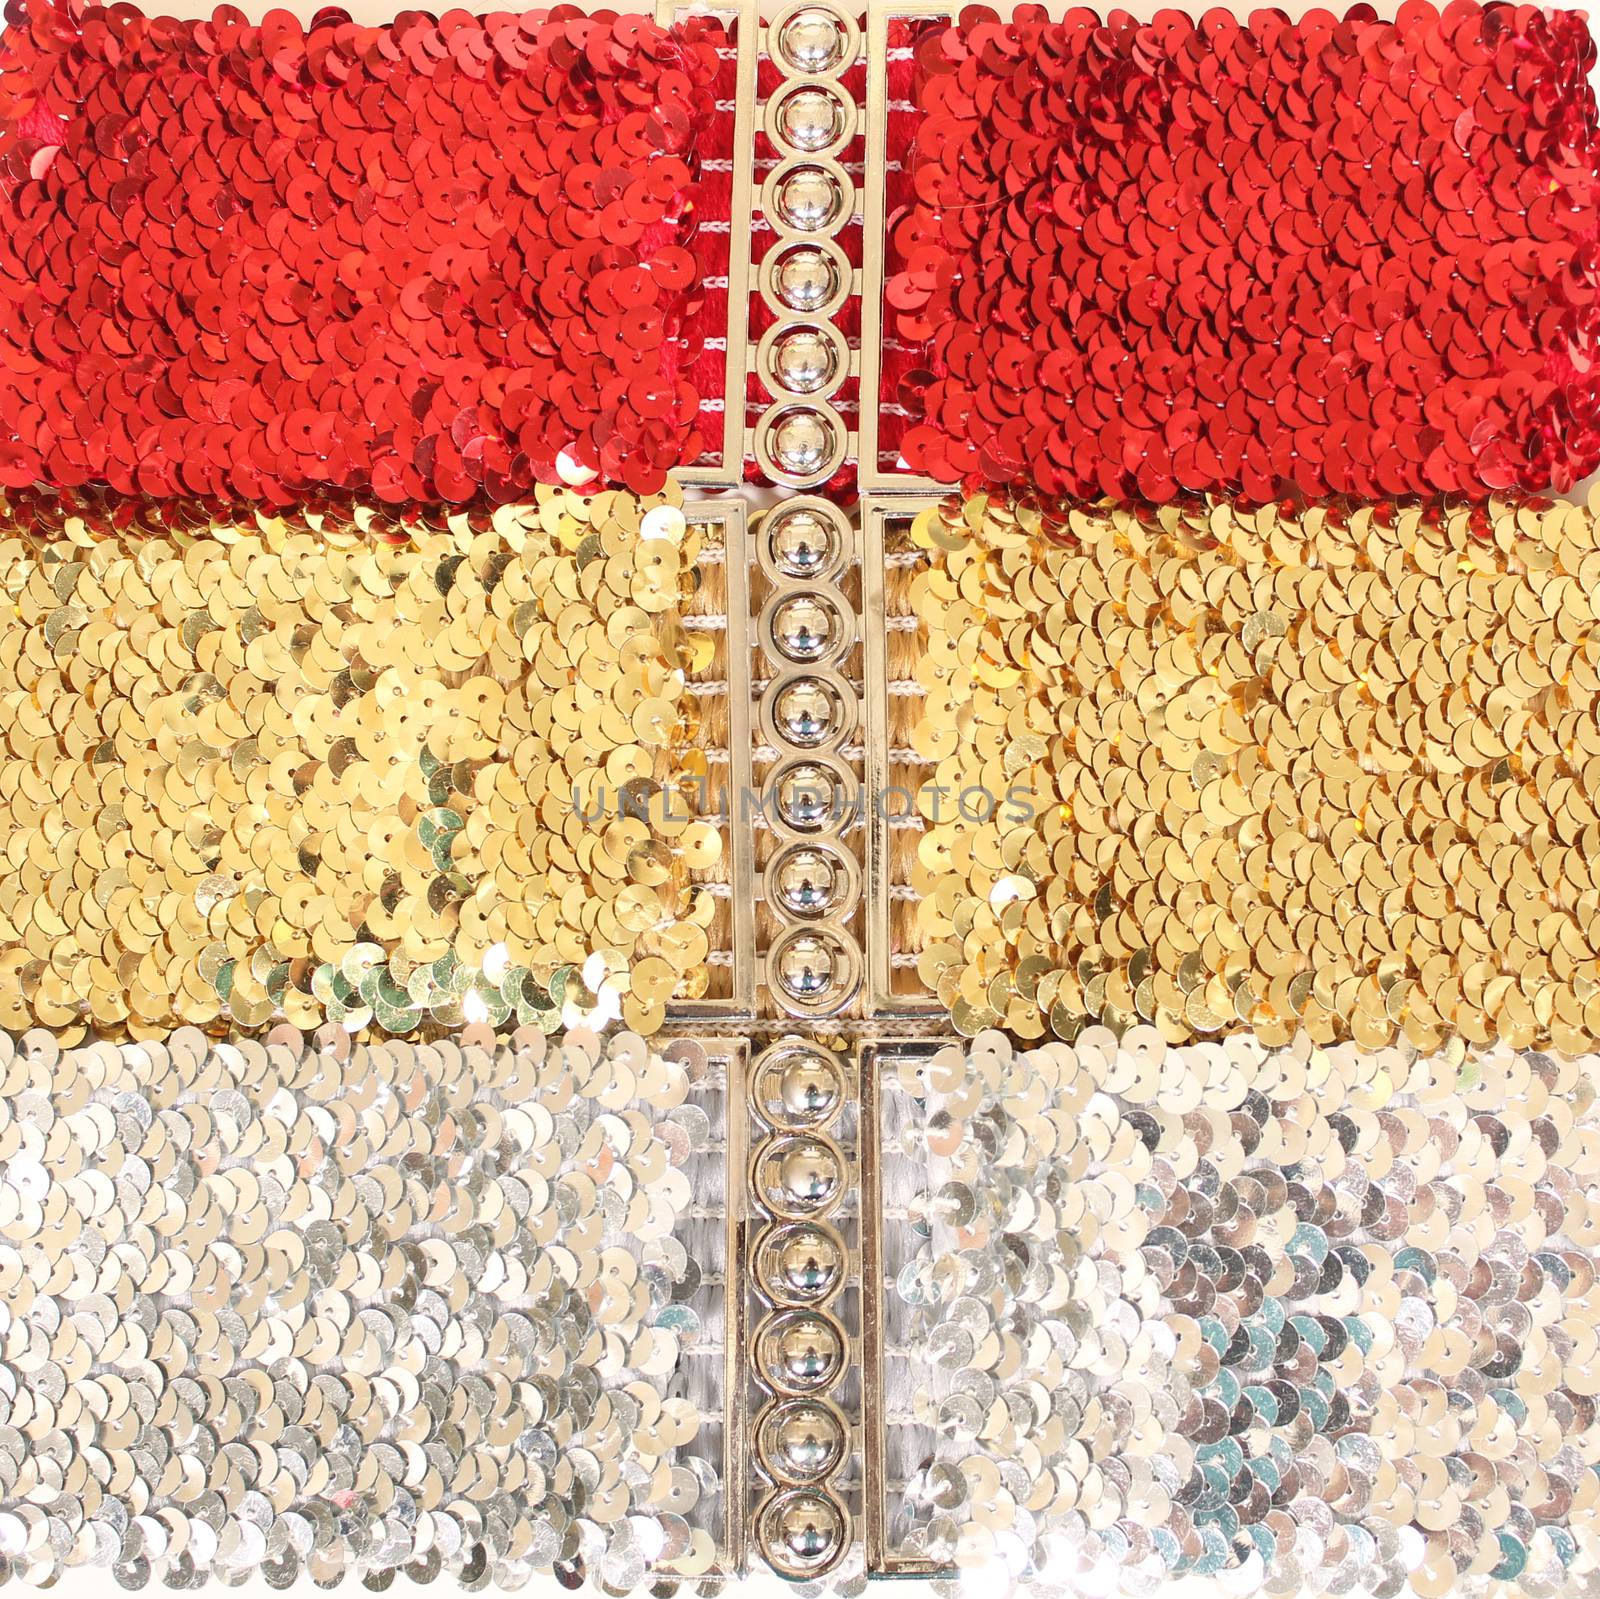 Vintage Belts With Sequins Red, Gold and Silver